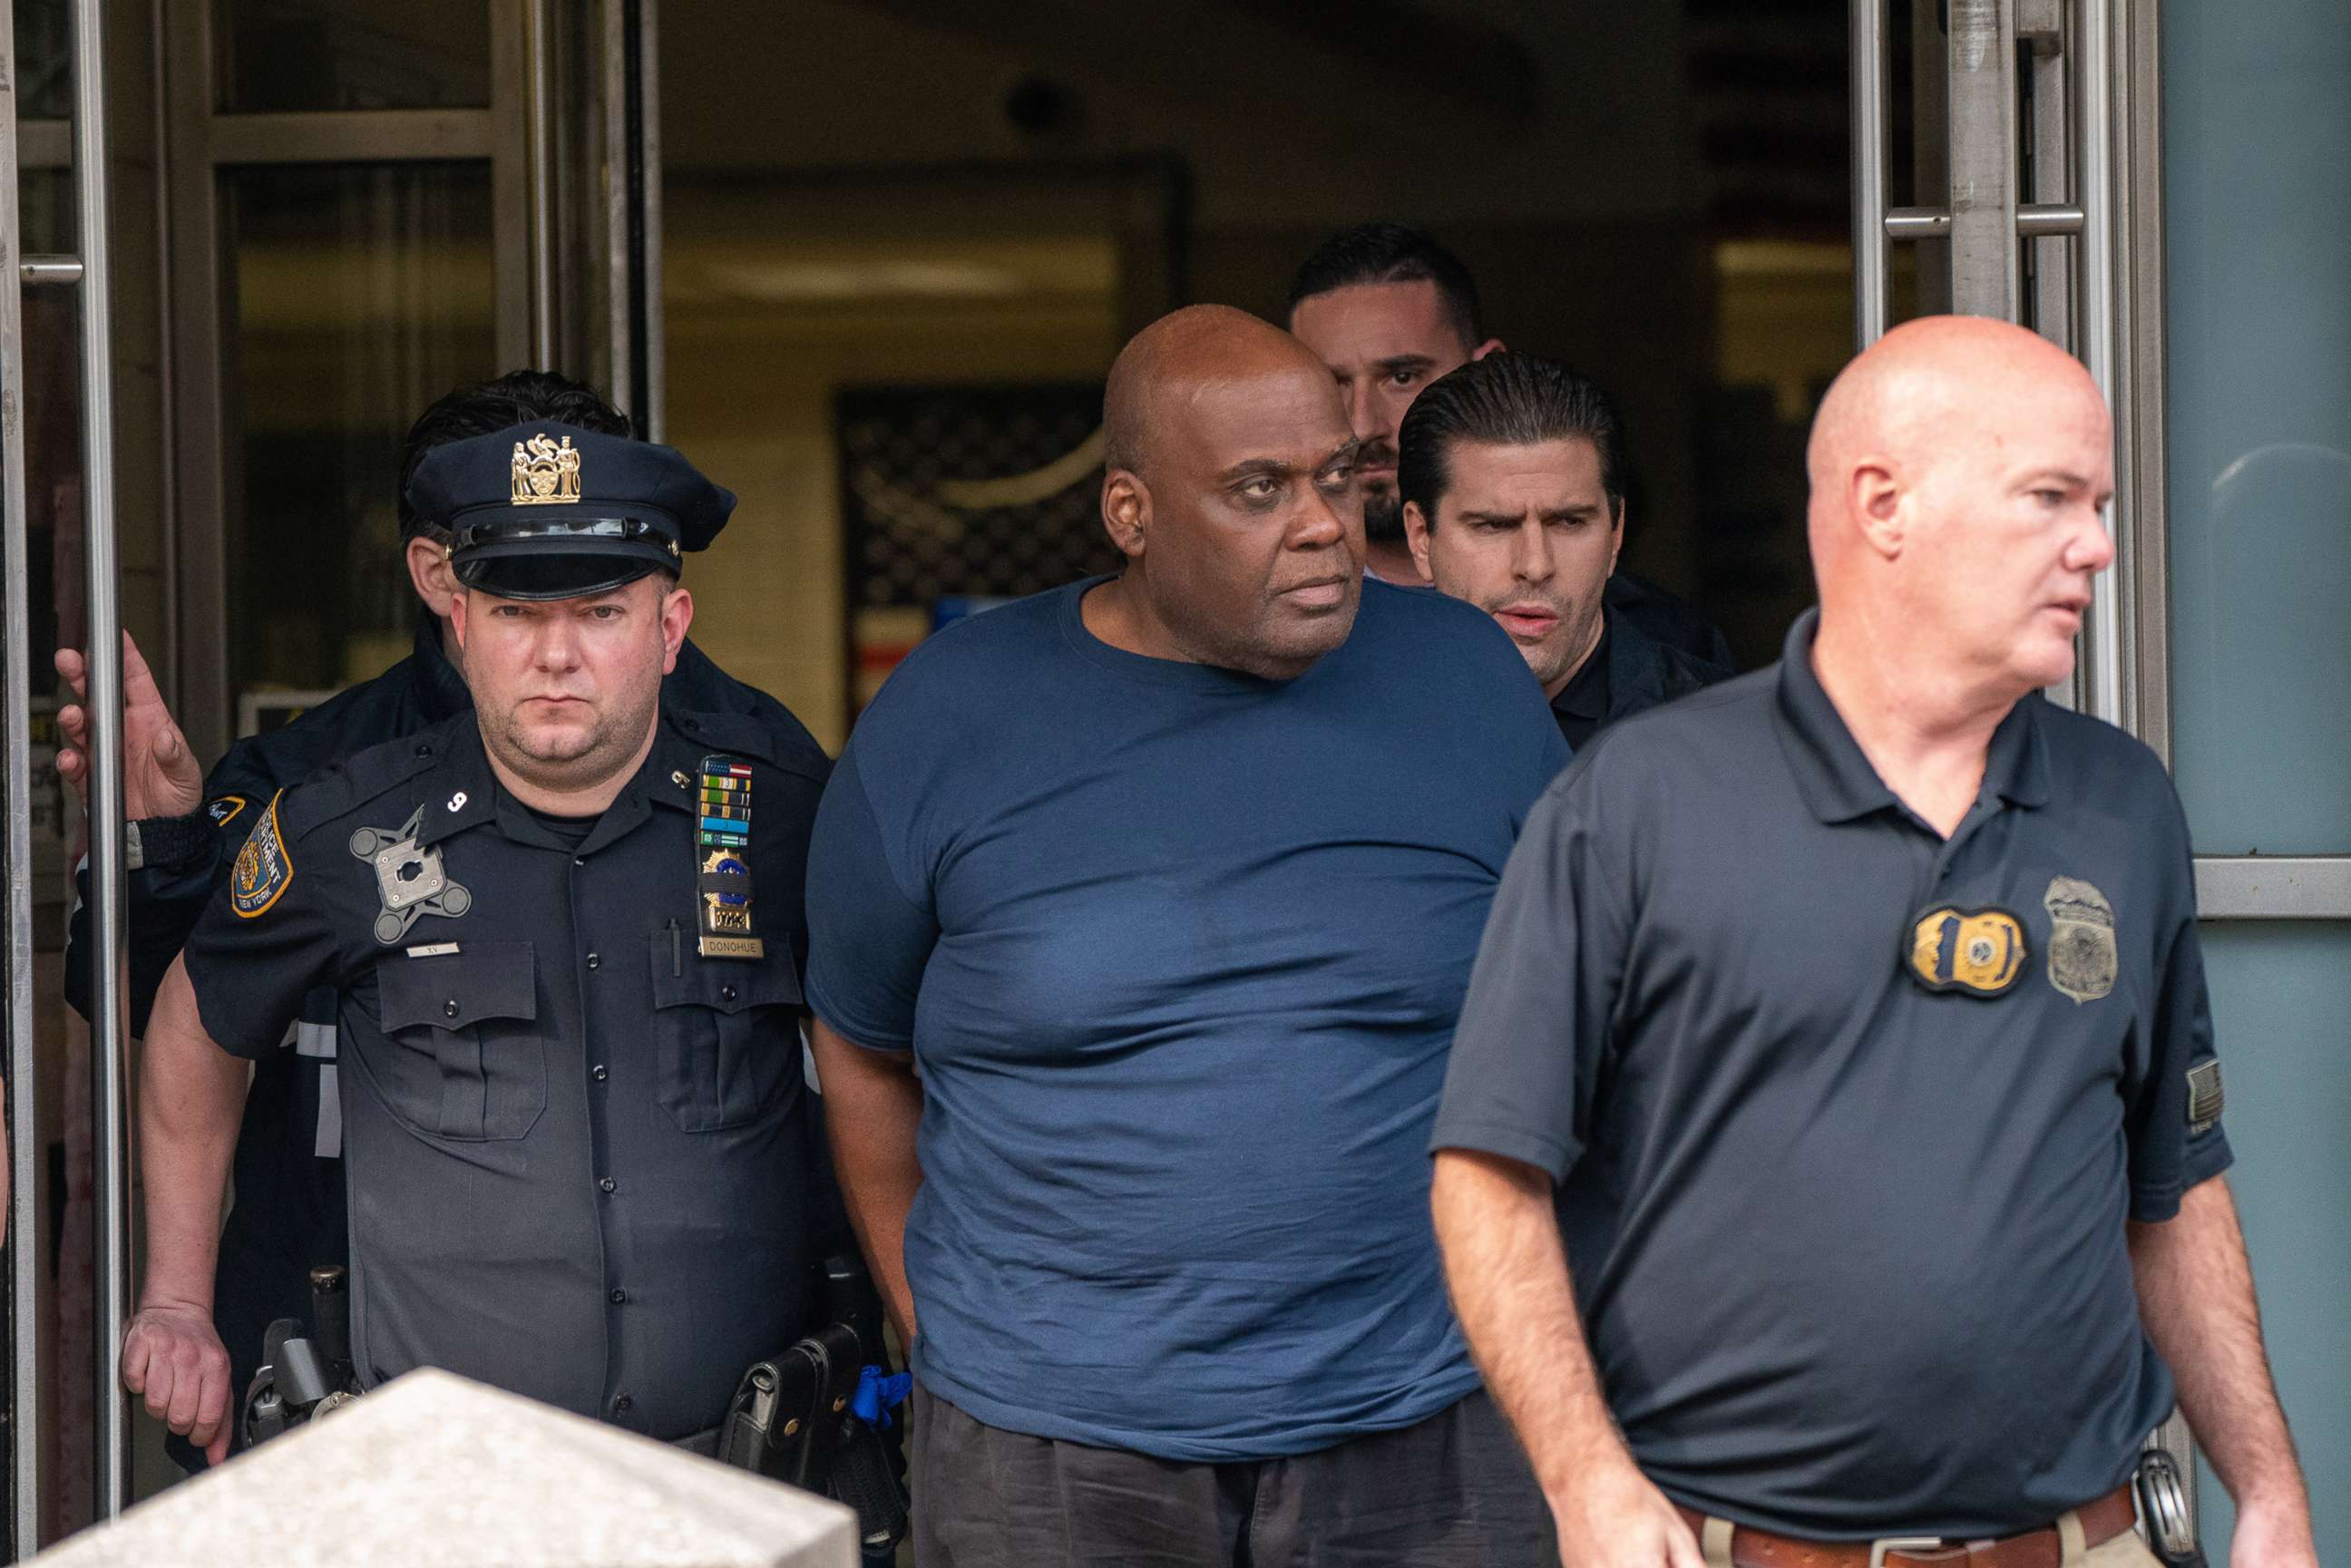 PHOTO: Suspect Frank James is escorted out of the 9th Precinct by police after being arrested for his connection to the mass shooting at the 36 St subway station in New York, April 13, 2022.